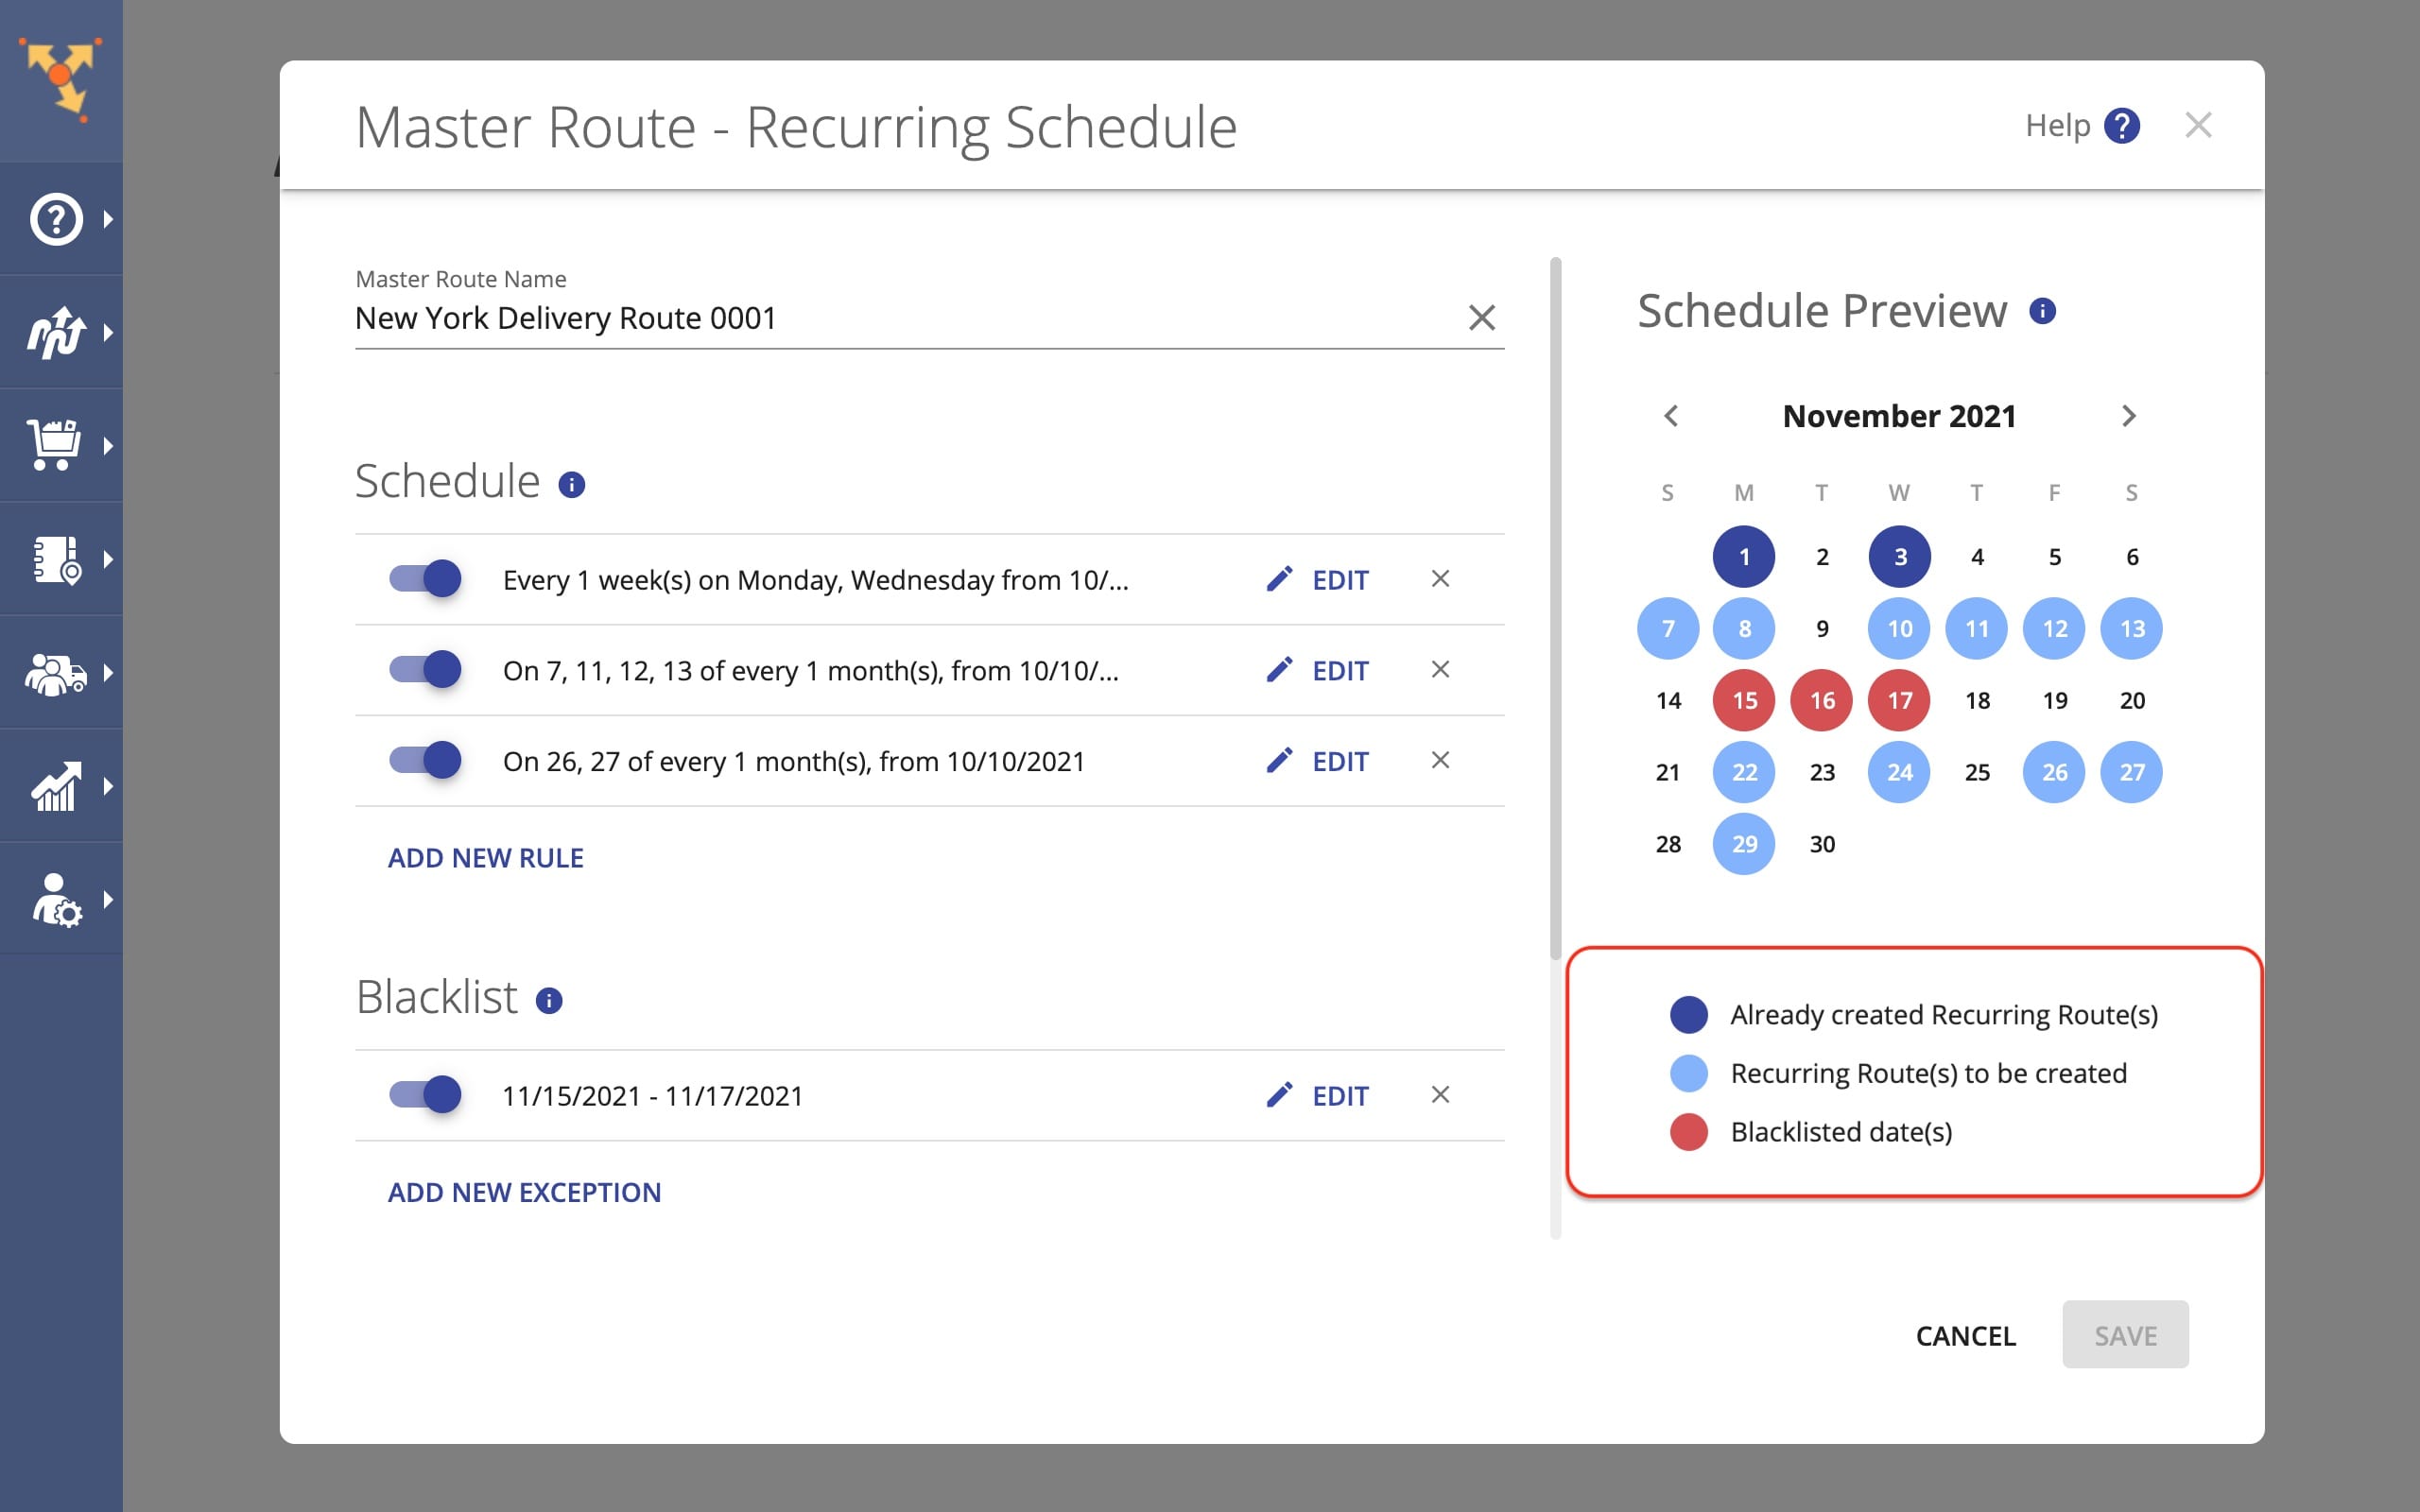 Schedule Preview shows scheduled repeating routes, planned delivery routes, and non-working dates.